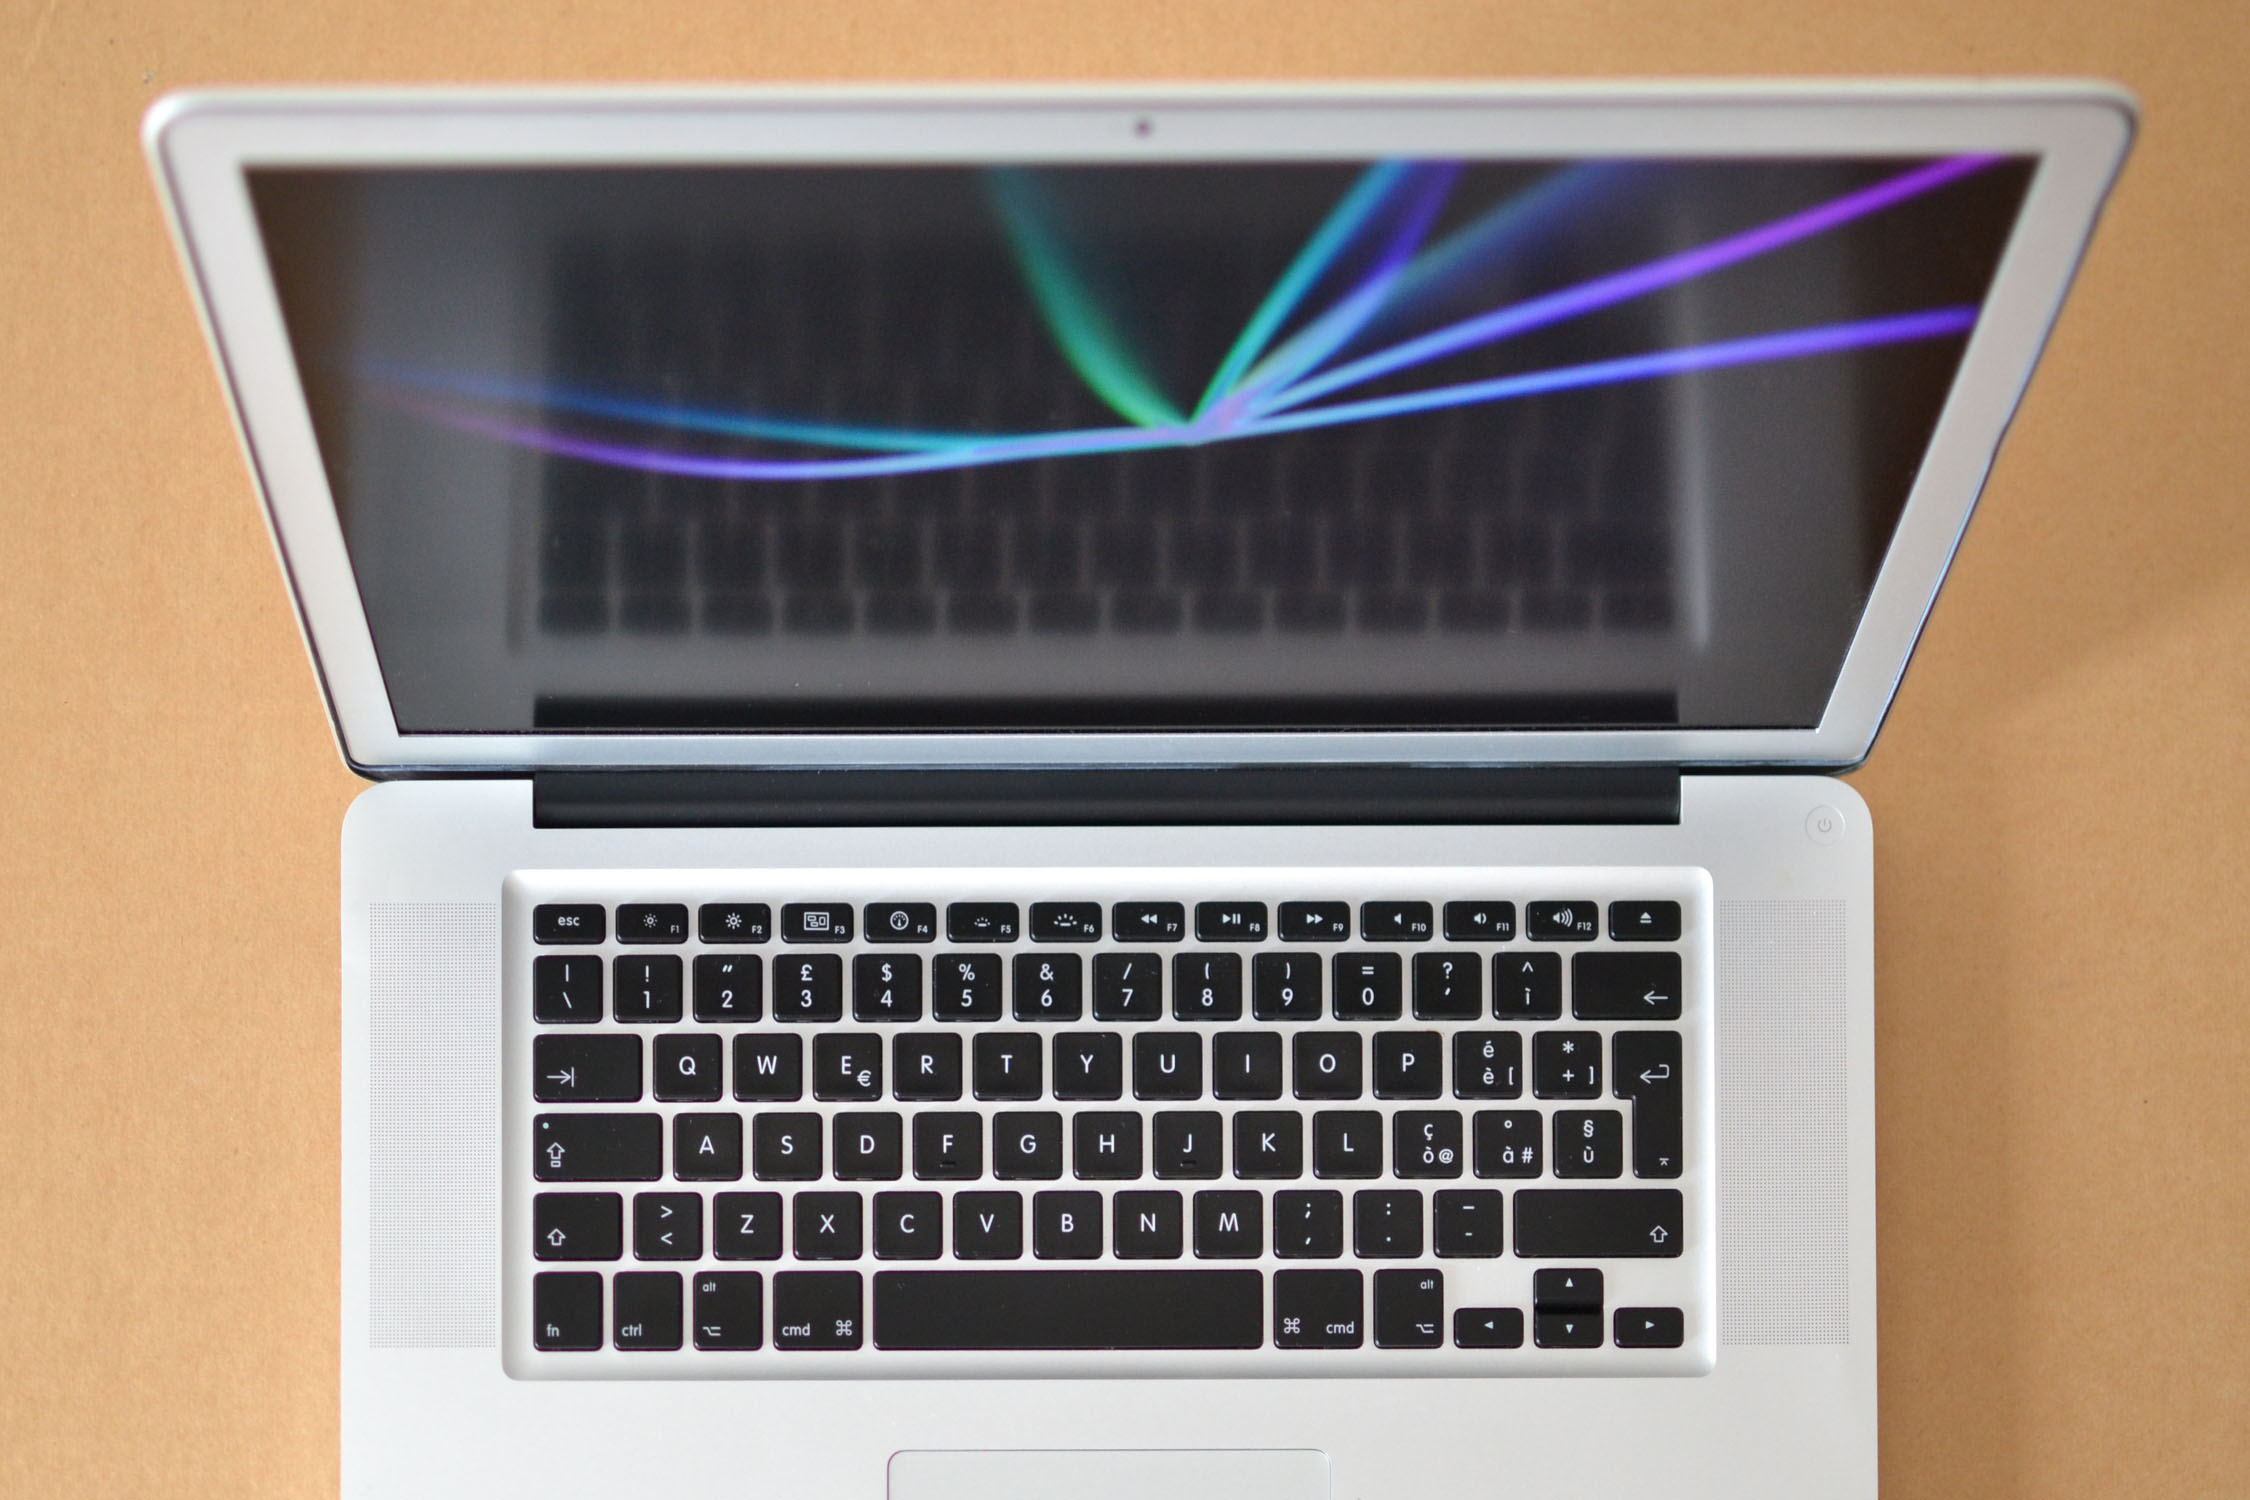 Experience Apple innovation with a sleek and powerful refurbished MacBook Air, now €247.99